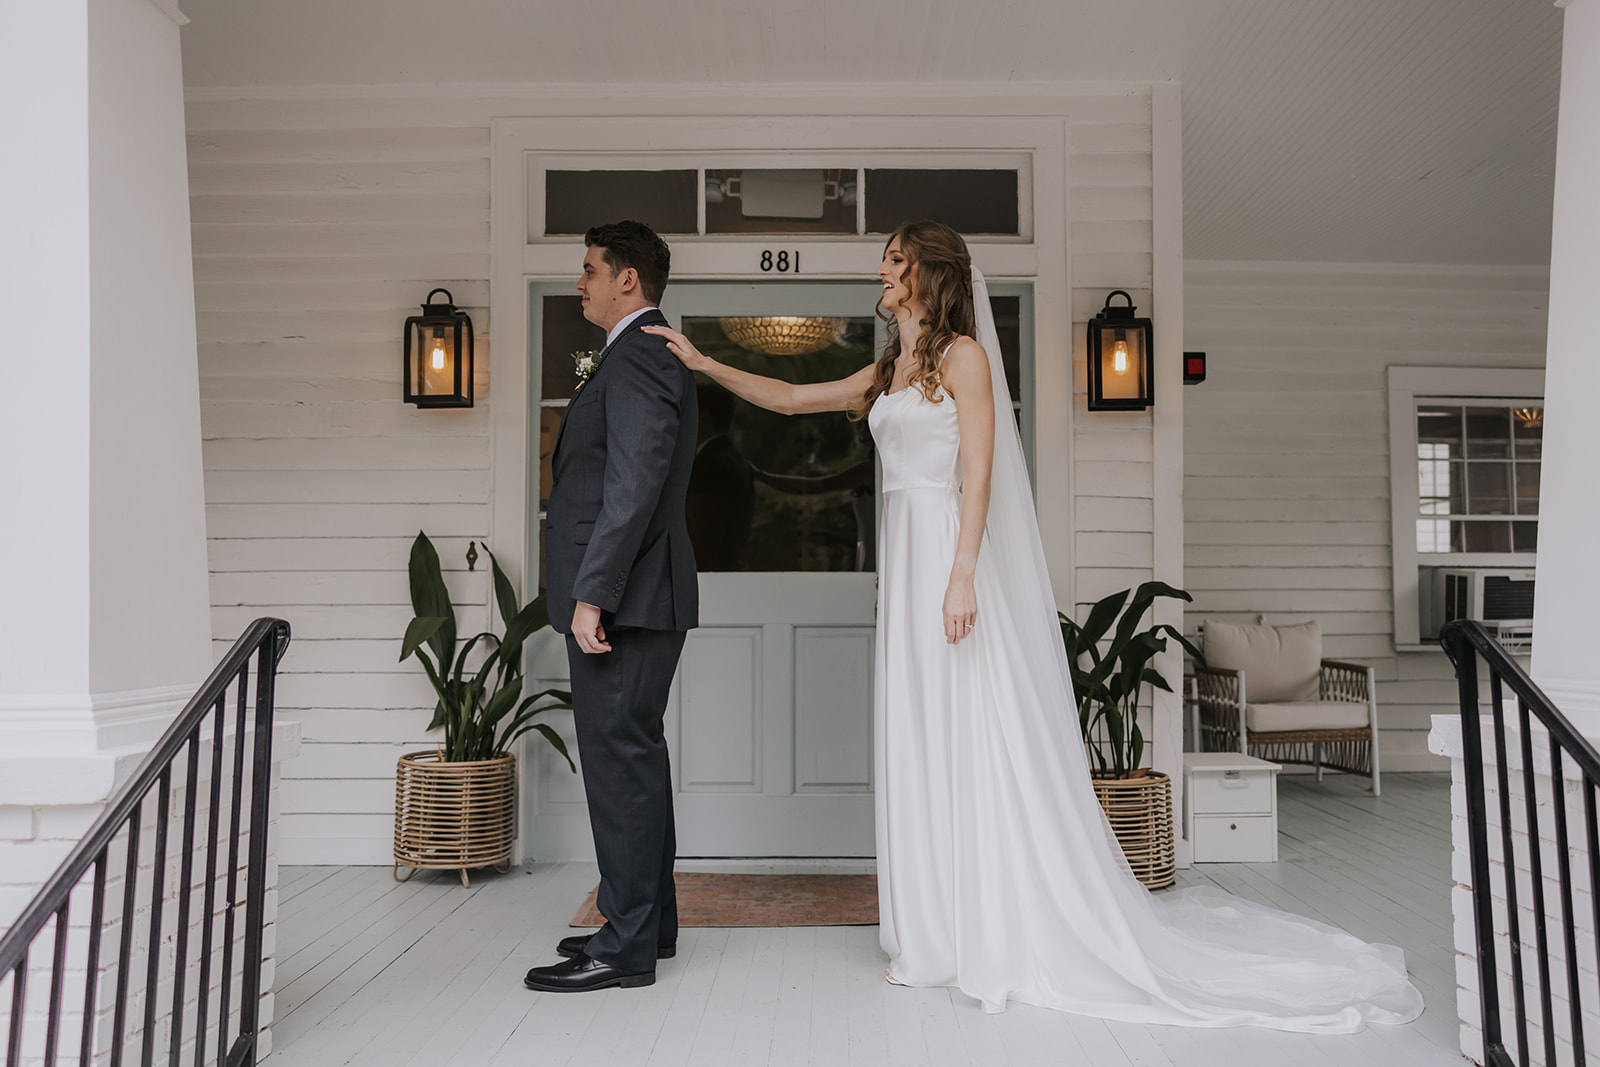 stunning bride and groom share prepare for their first look photoshoot! Learn how to plan your perfect wedding day timeline!